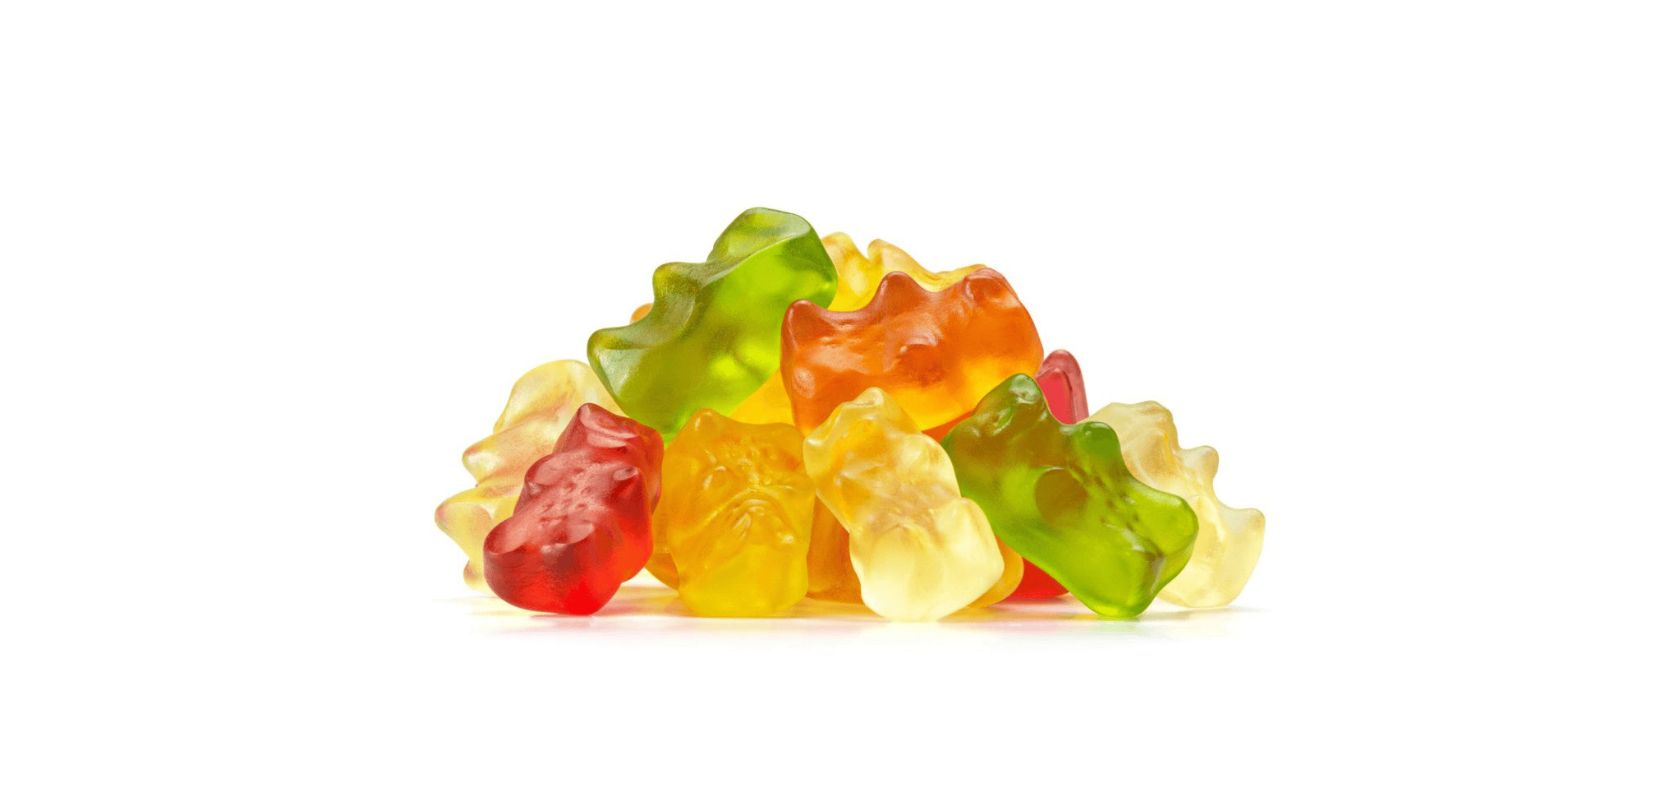 The potency of a THC gummy can vary, but usually, it ranges between 5mg to 100mg per piece. Typically, this is the amount of THC for recreational users. 